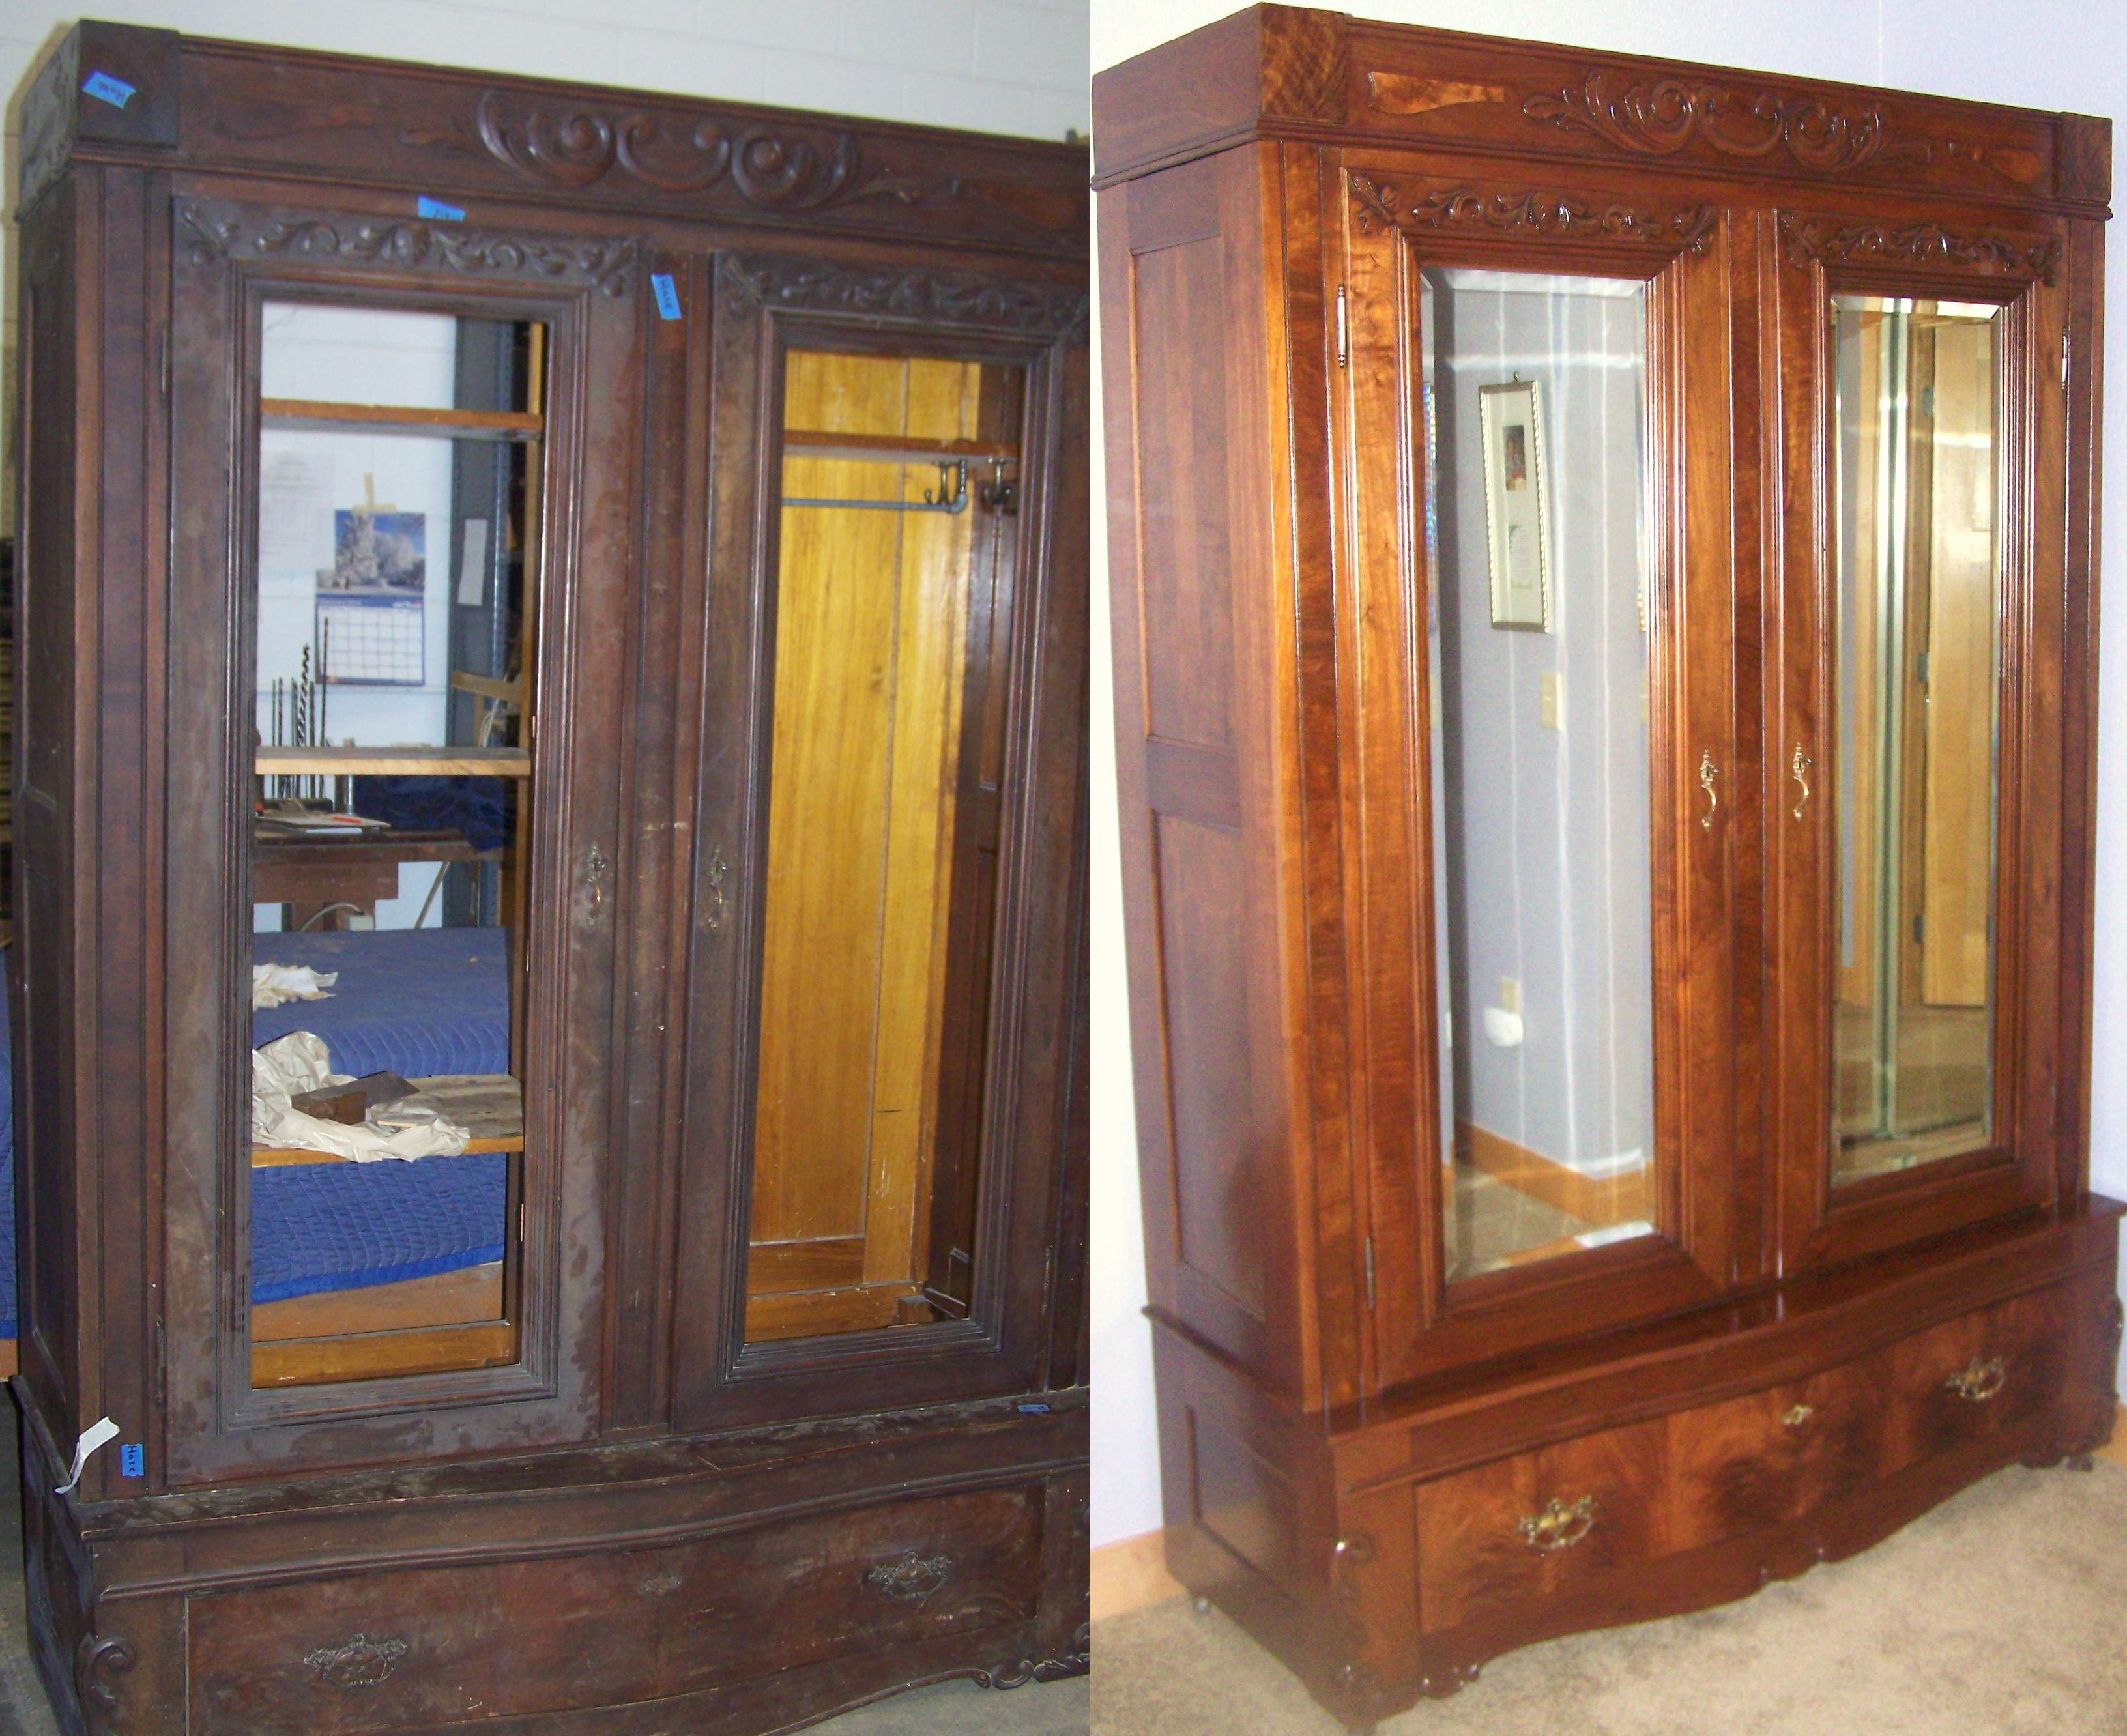 Wardrobe We Were Chosen By A Milwaukee Resident To Do A Complete Restoration On This Wardrobe We Repaired And Solidified The Entire Unit, Fit The Doors And Drawer To Function Properly, Polished All Brass Hardware, And Custom Finished To Fit The Customers Decor